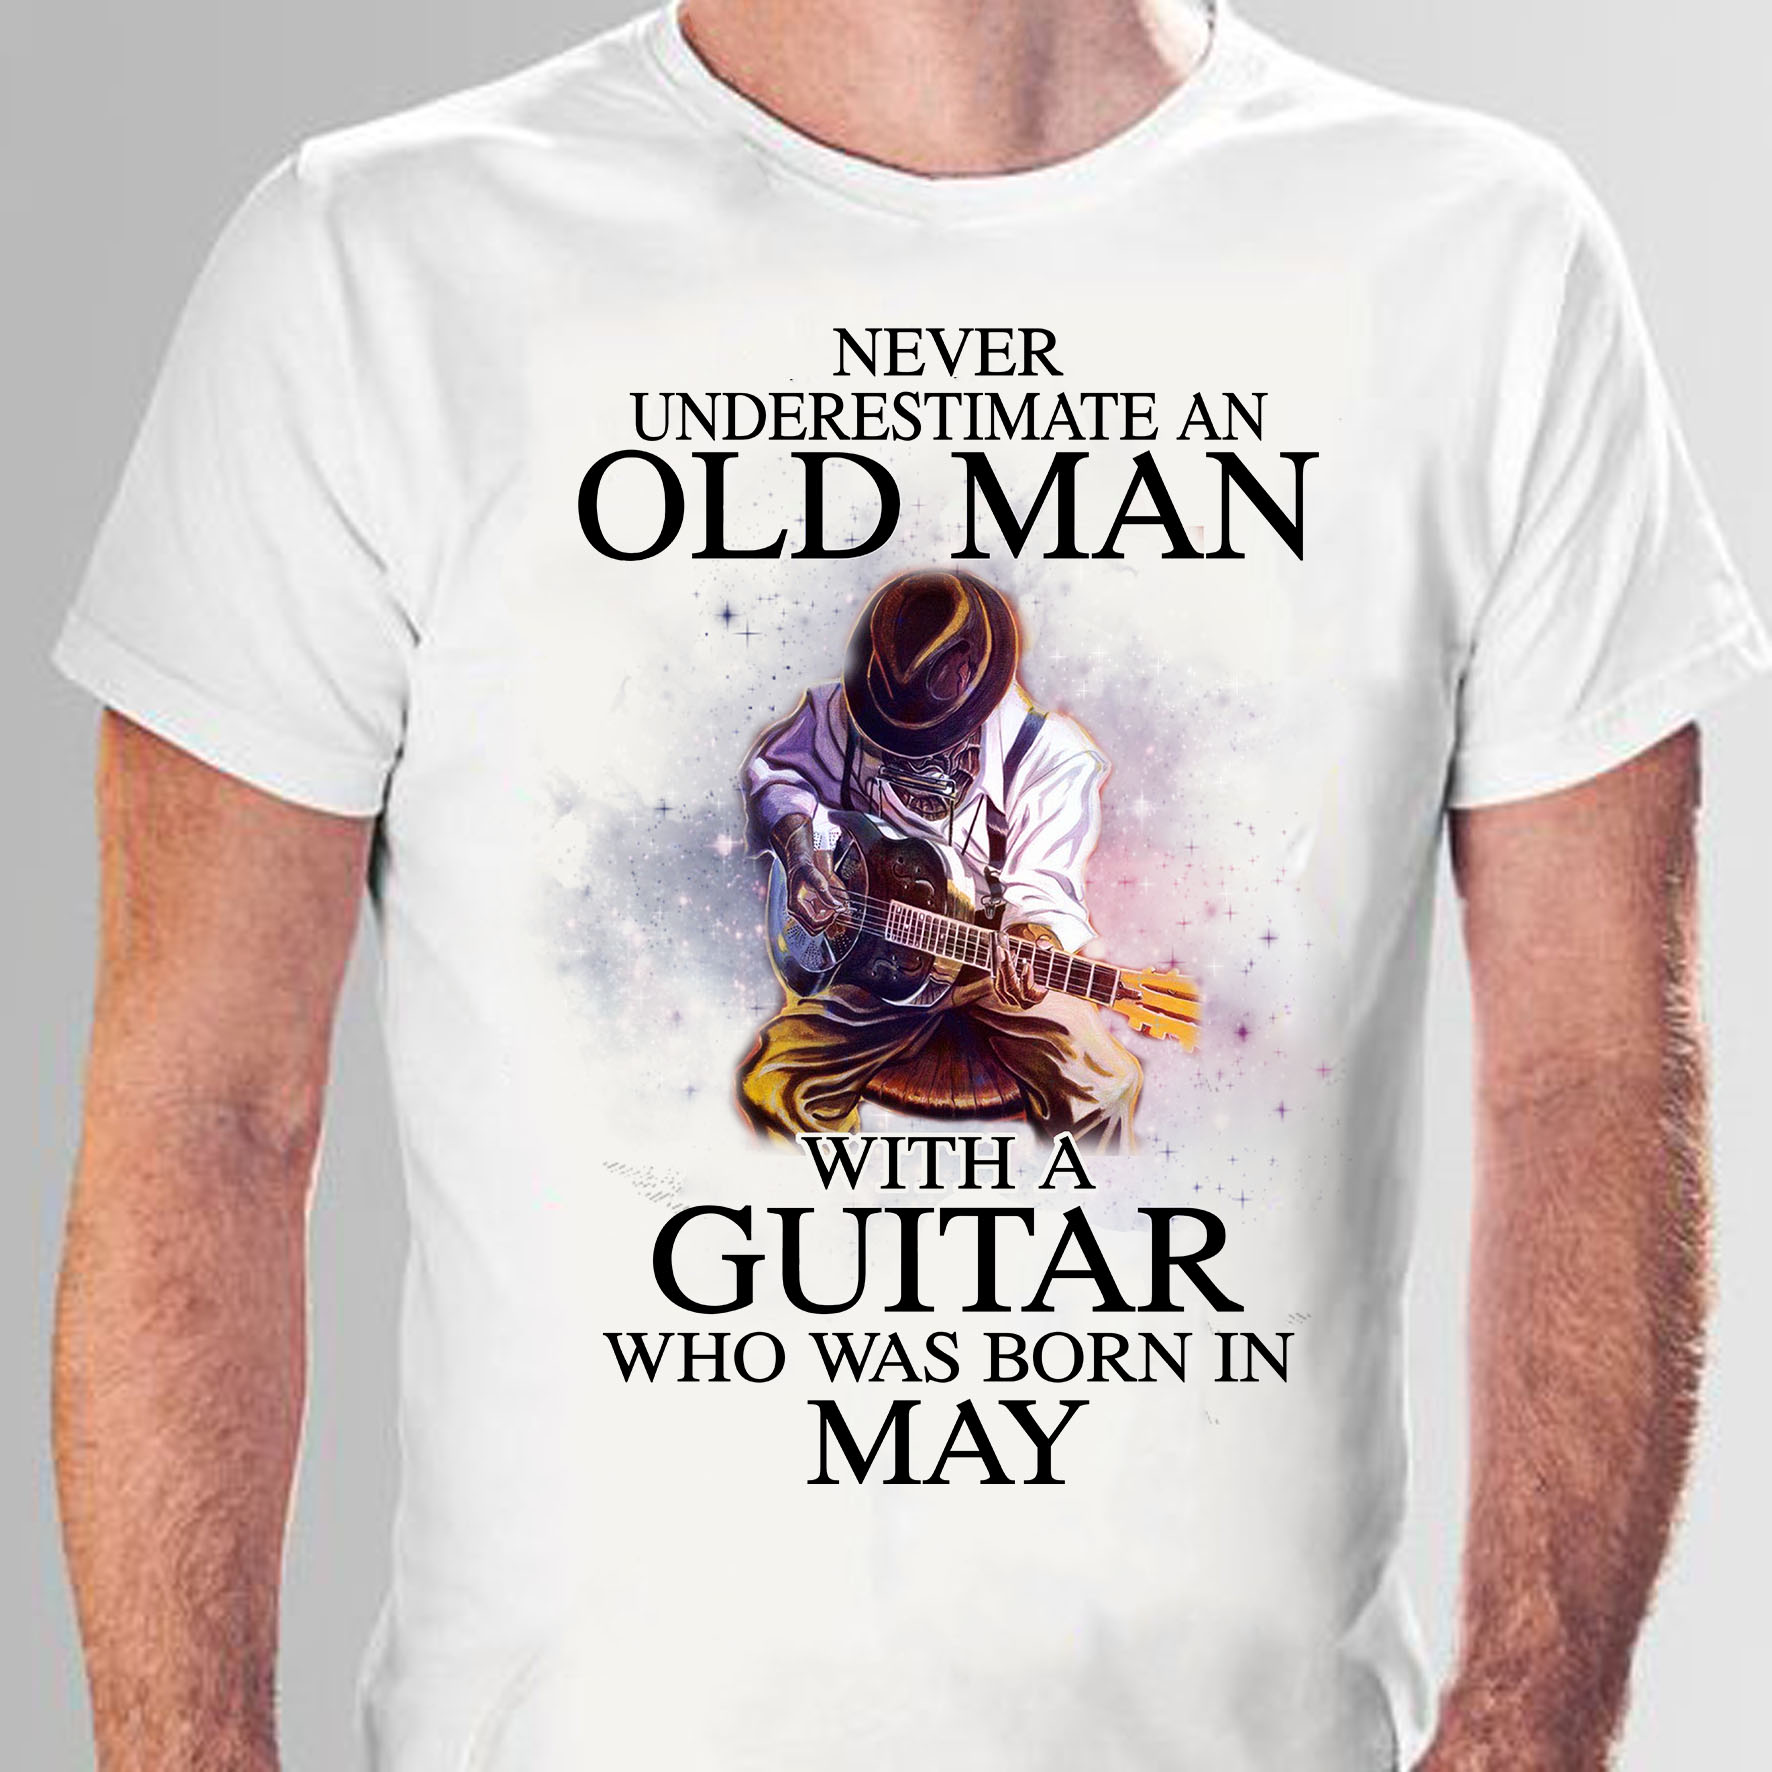 Never underestimate an old man with a guitar who was born in May - Guitarist